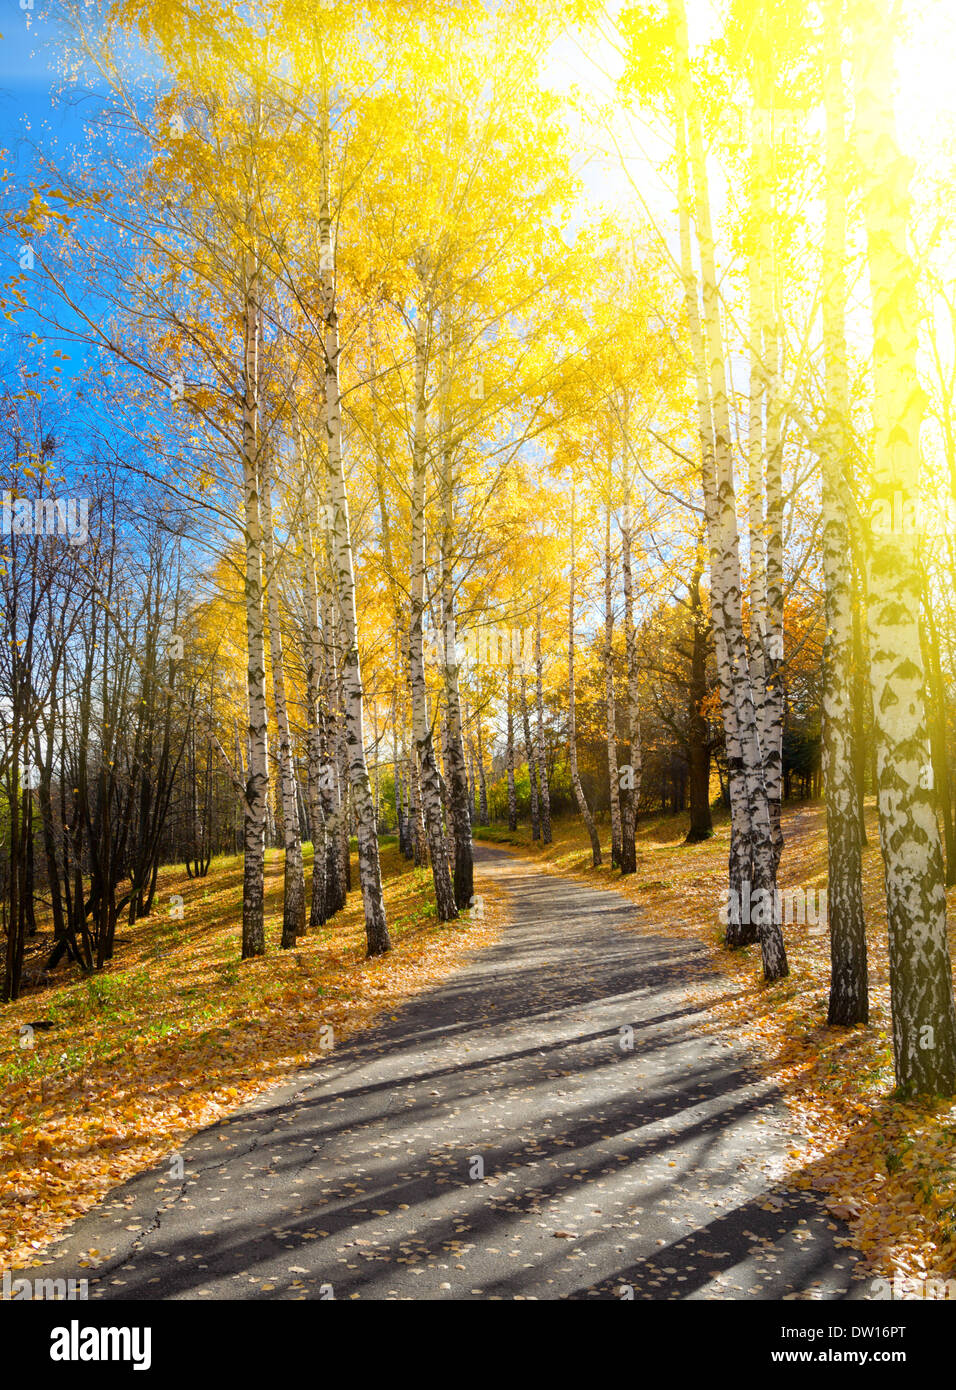 Pathway in autumn forest Stock Photo